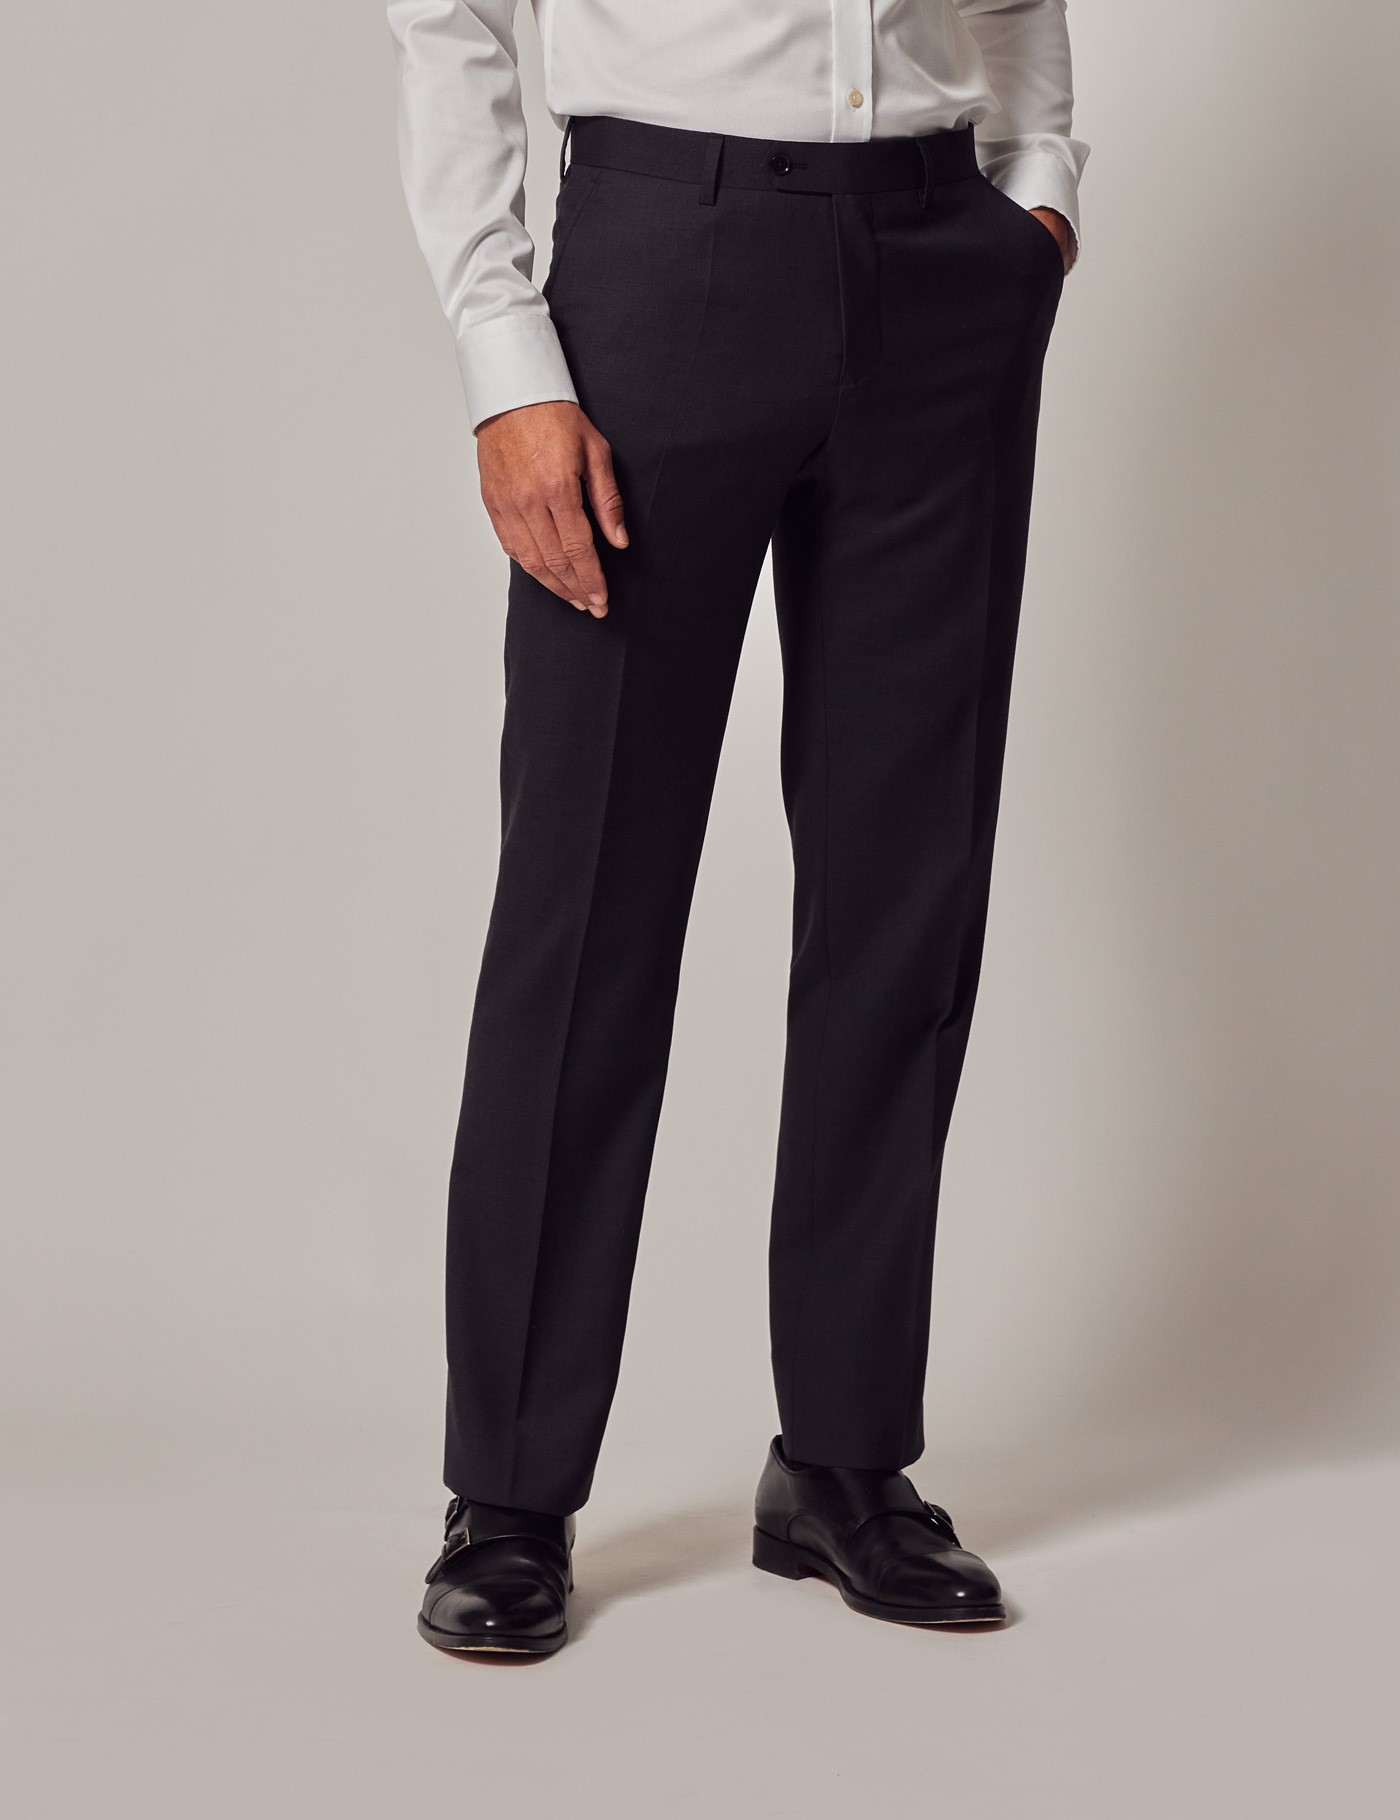 Super Skinny 4 Way Stretch Tailored Trouser | boohoo